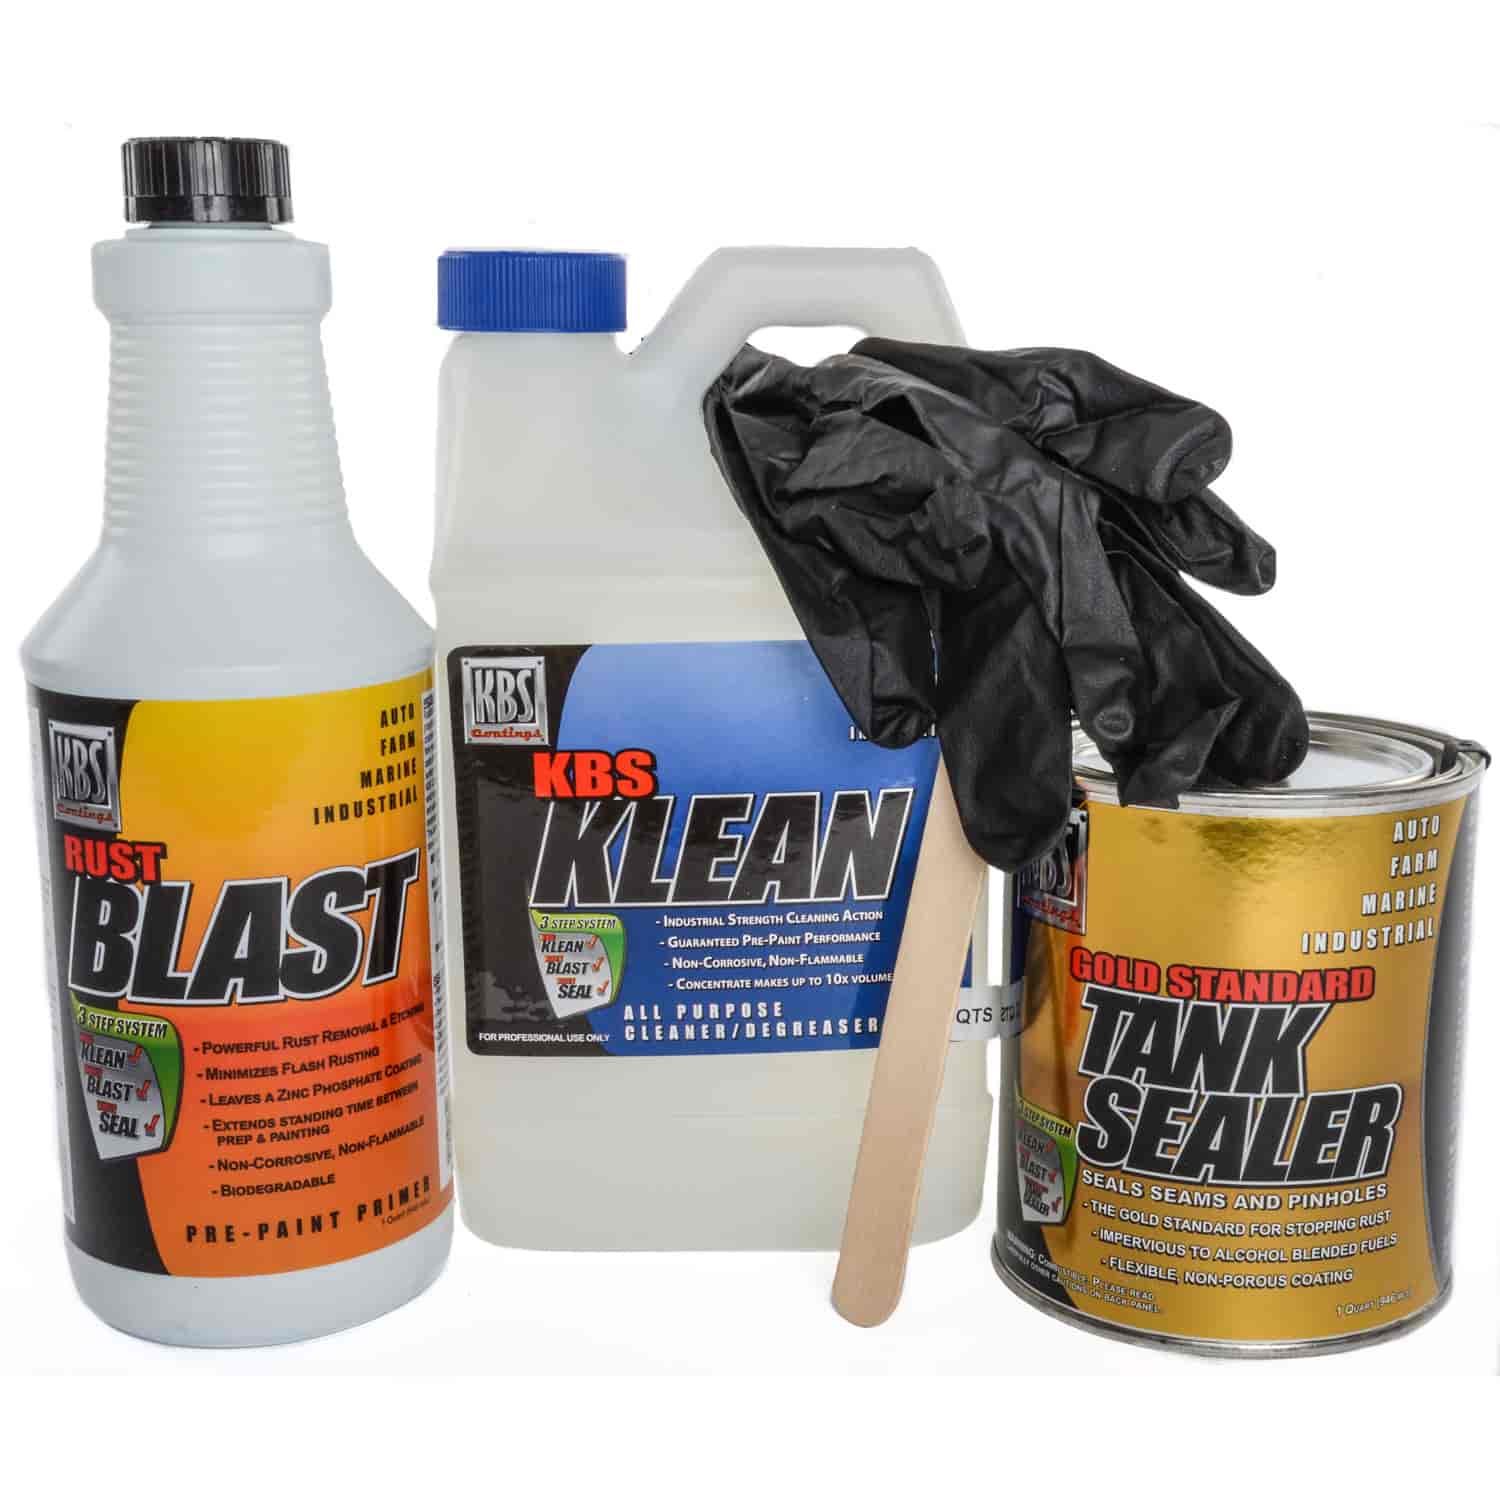 Auto Fuel Tank Sealer Kit Up to a 25-gallon tank Also includes: